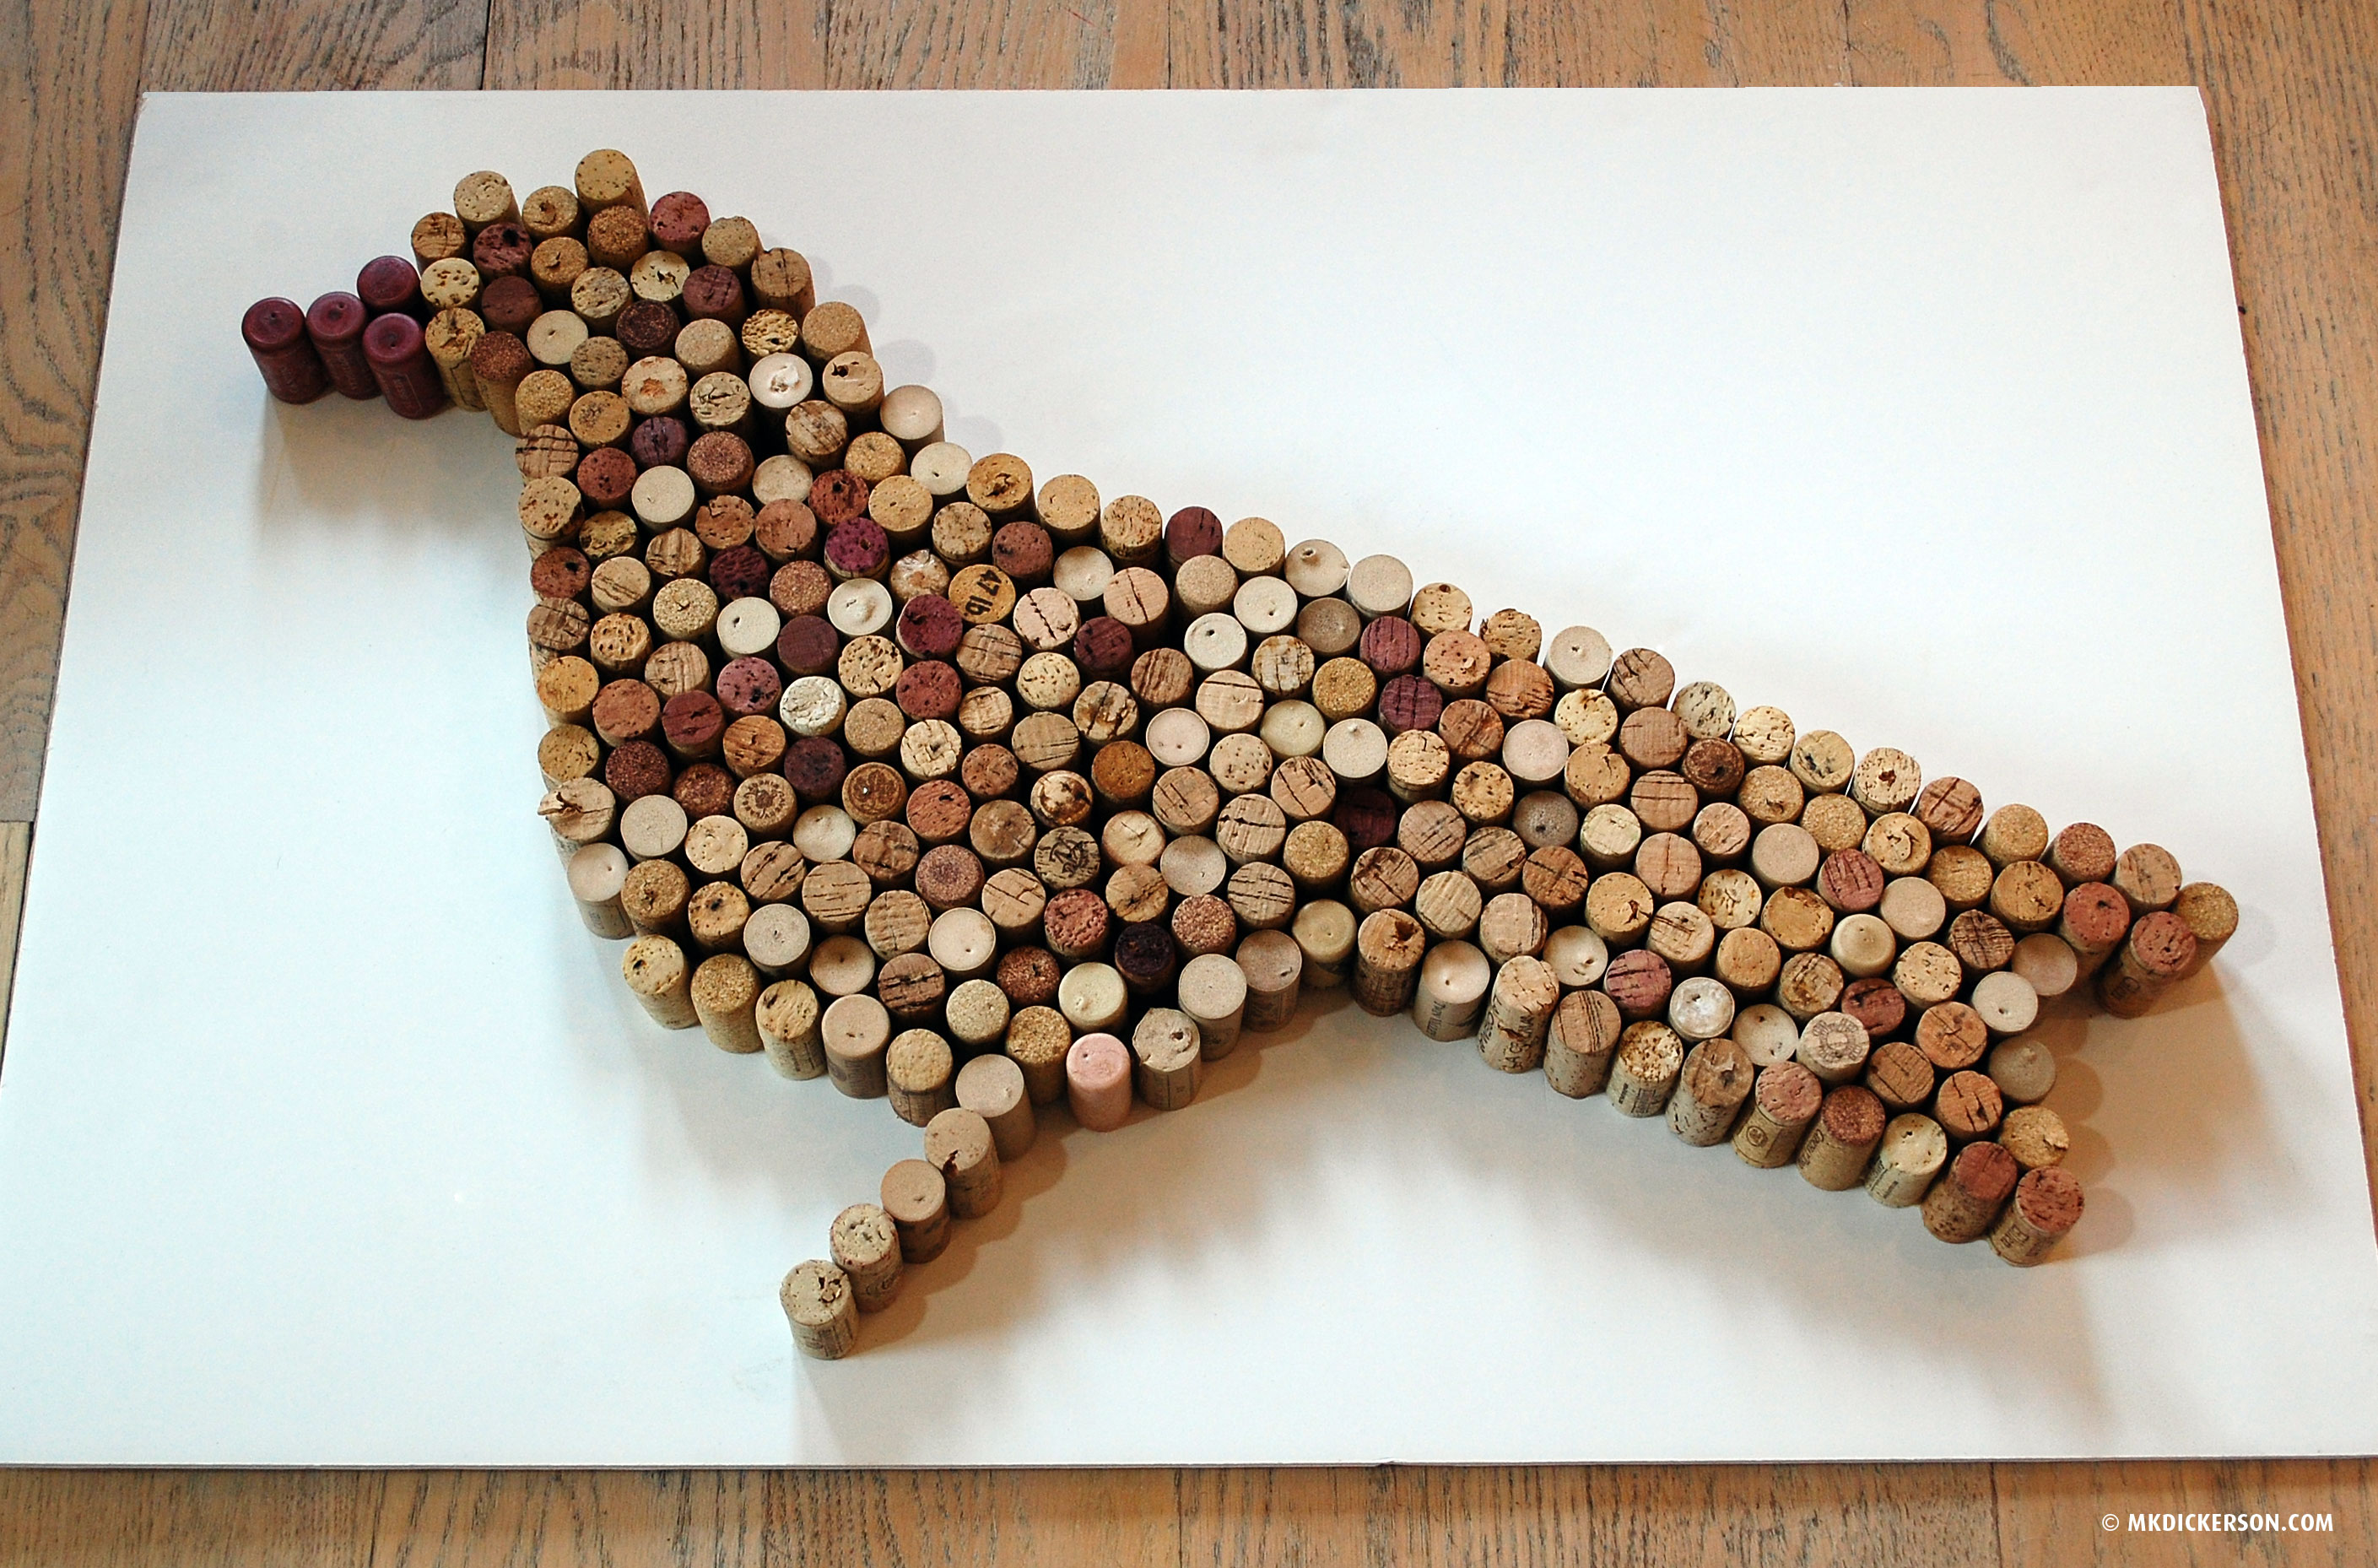 Bird House Made From Wine Corks